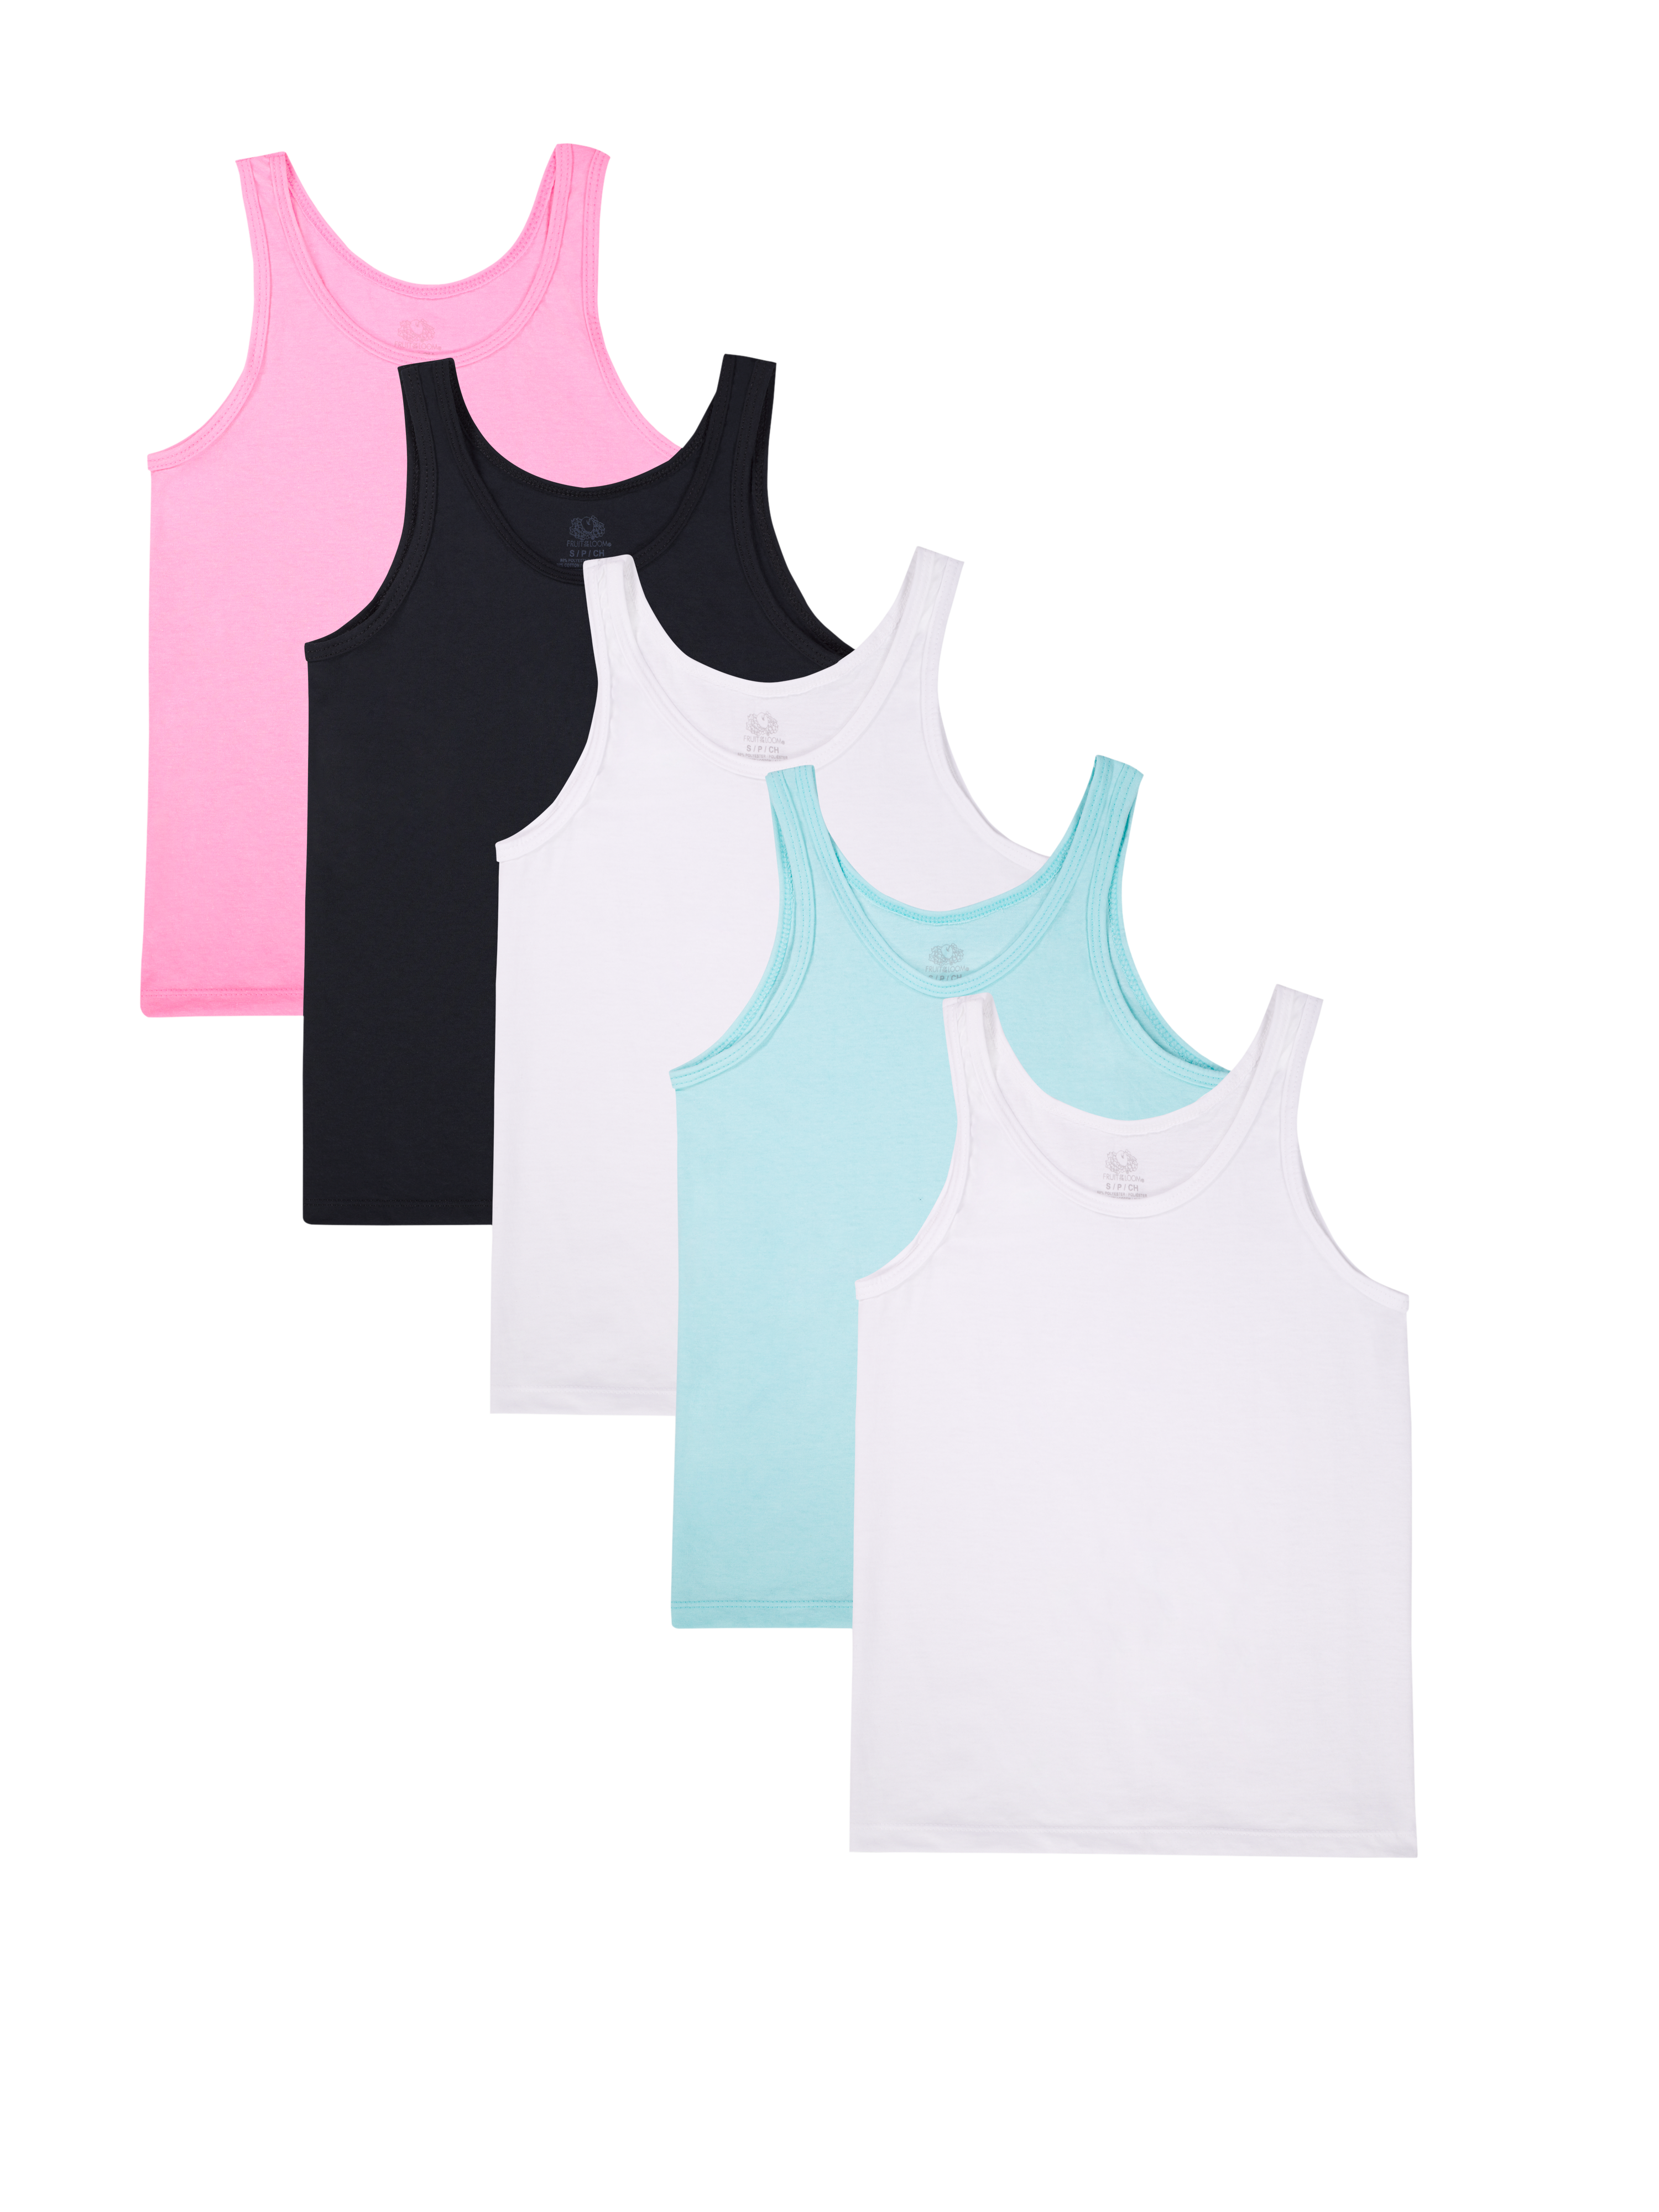 FRUIT OF THE LOOM GIRLS' ASSORTED TANK, 5 PACK